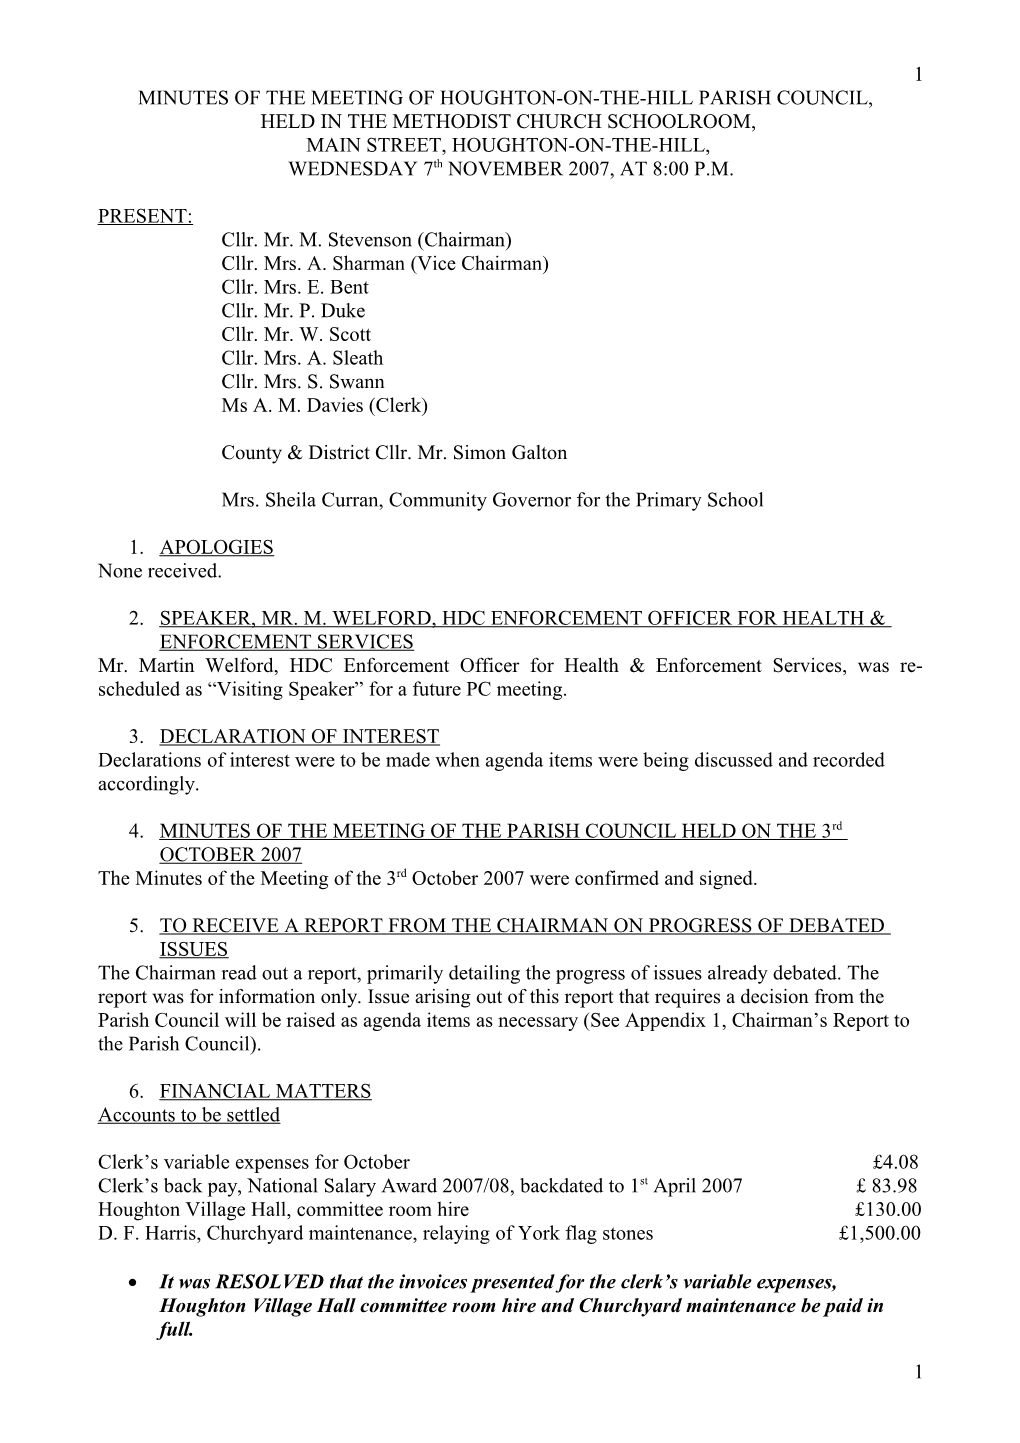 Minutes of the Meeting of Houghton-On-The-Hill Parish Council